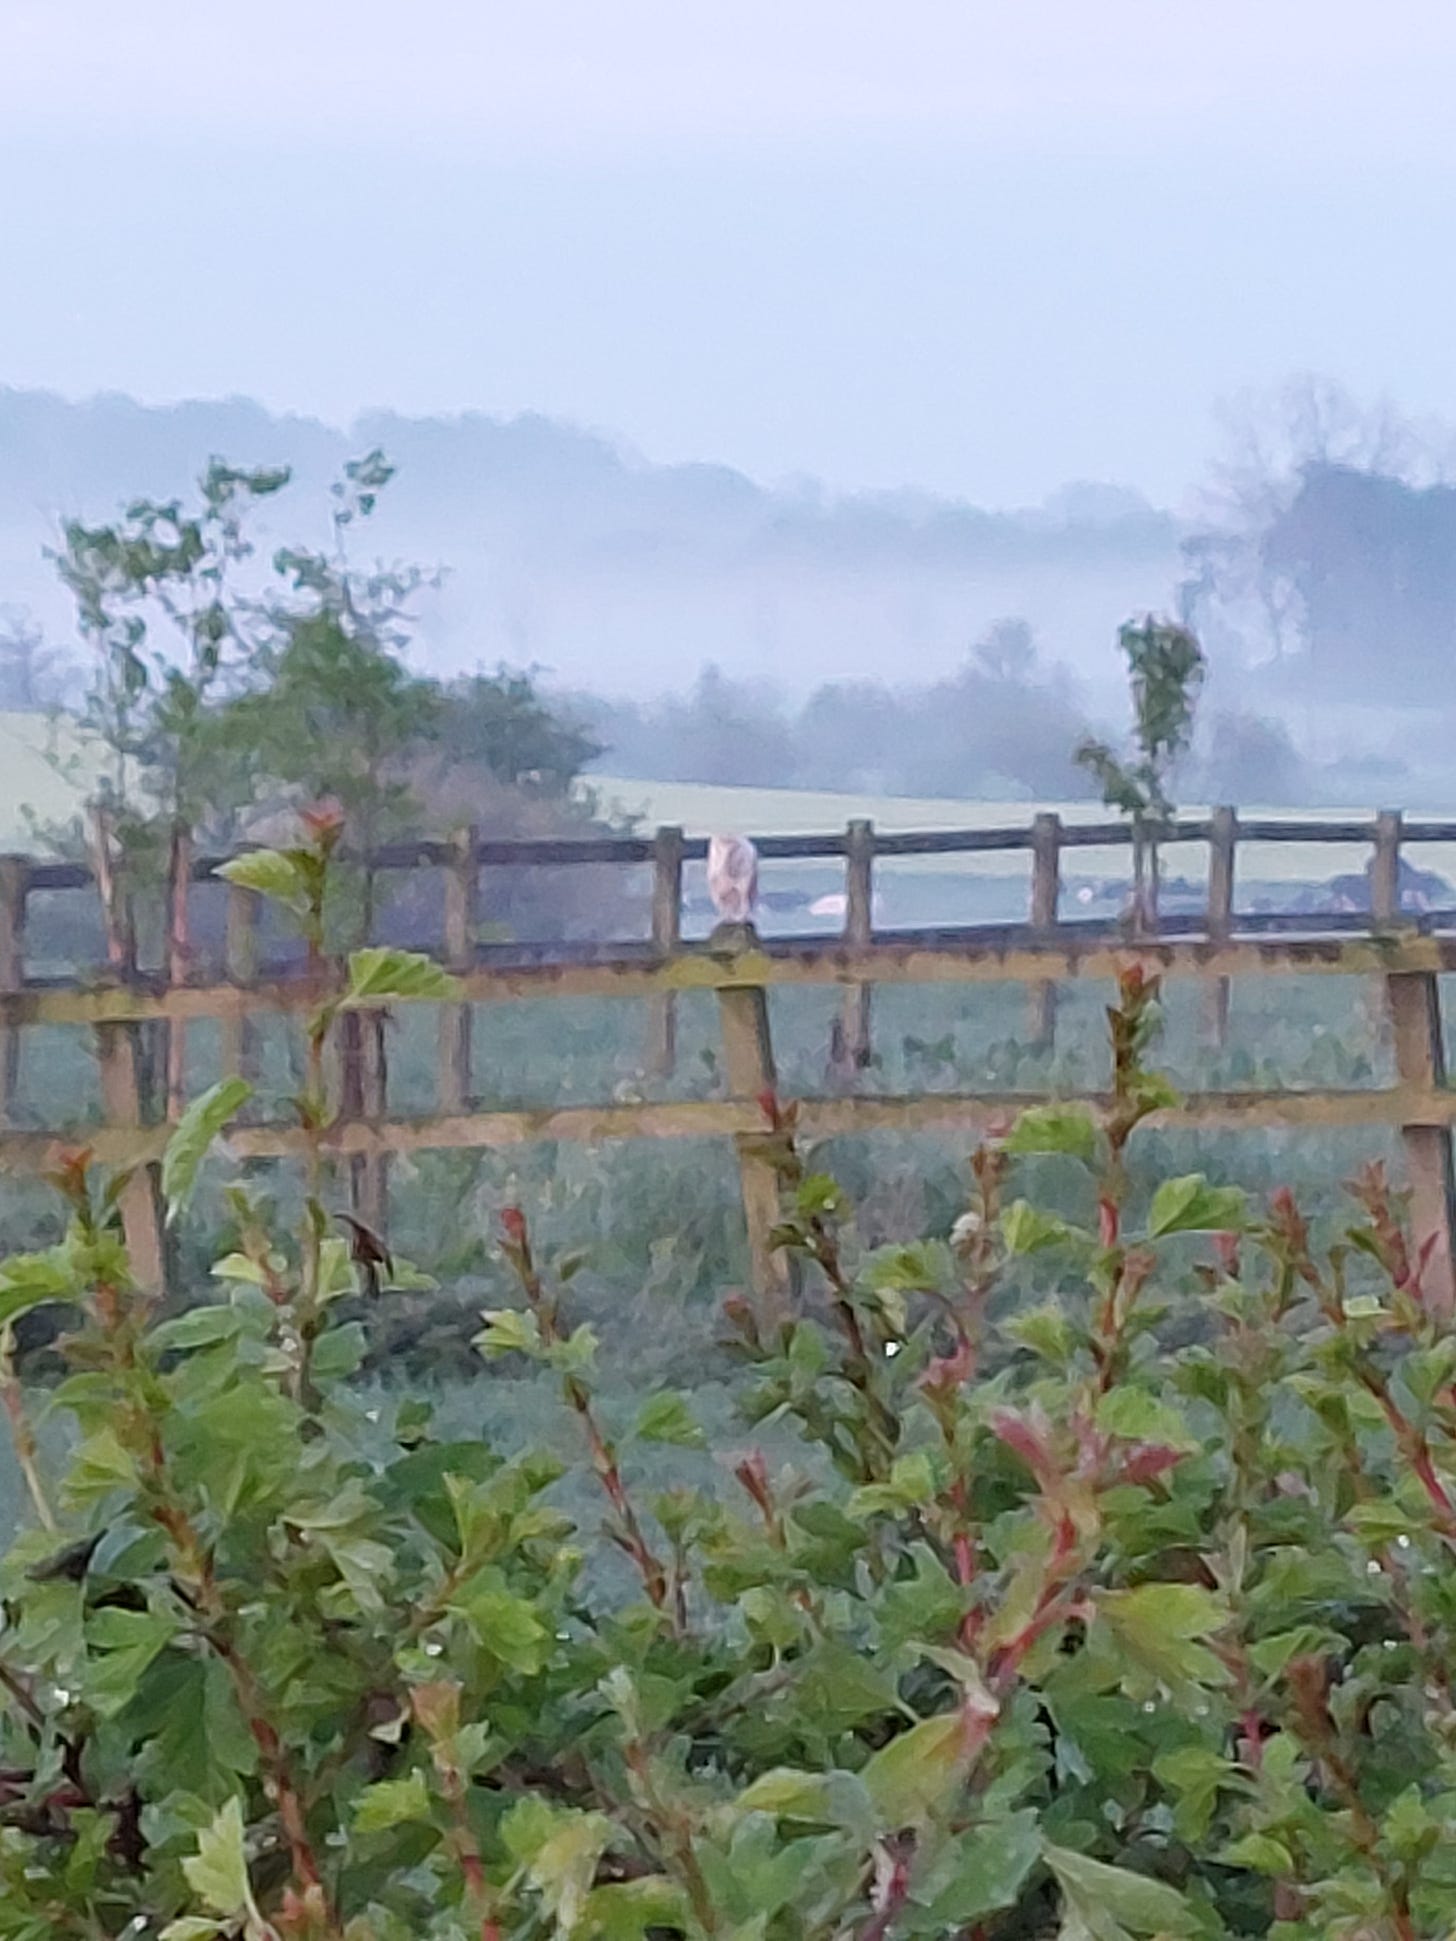 A blurry zoomed in photo of a barn owl sitting on a fence post, mist covered trees in the background, green leaves in the foreground